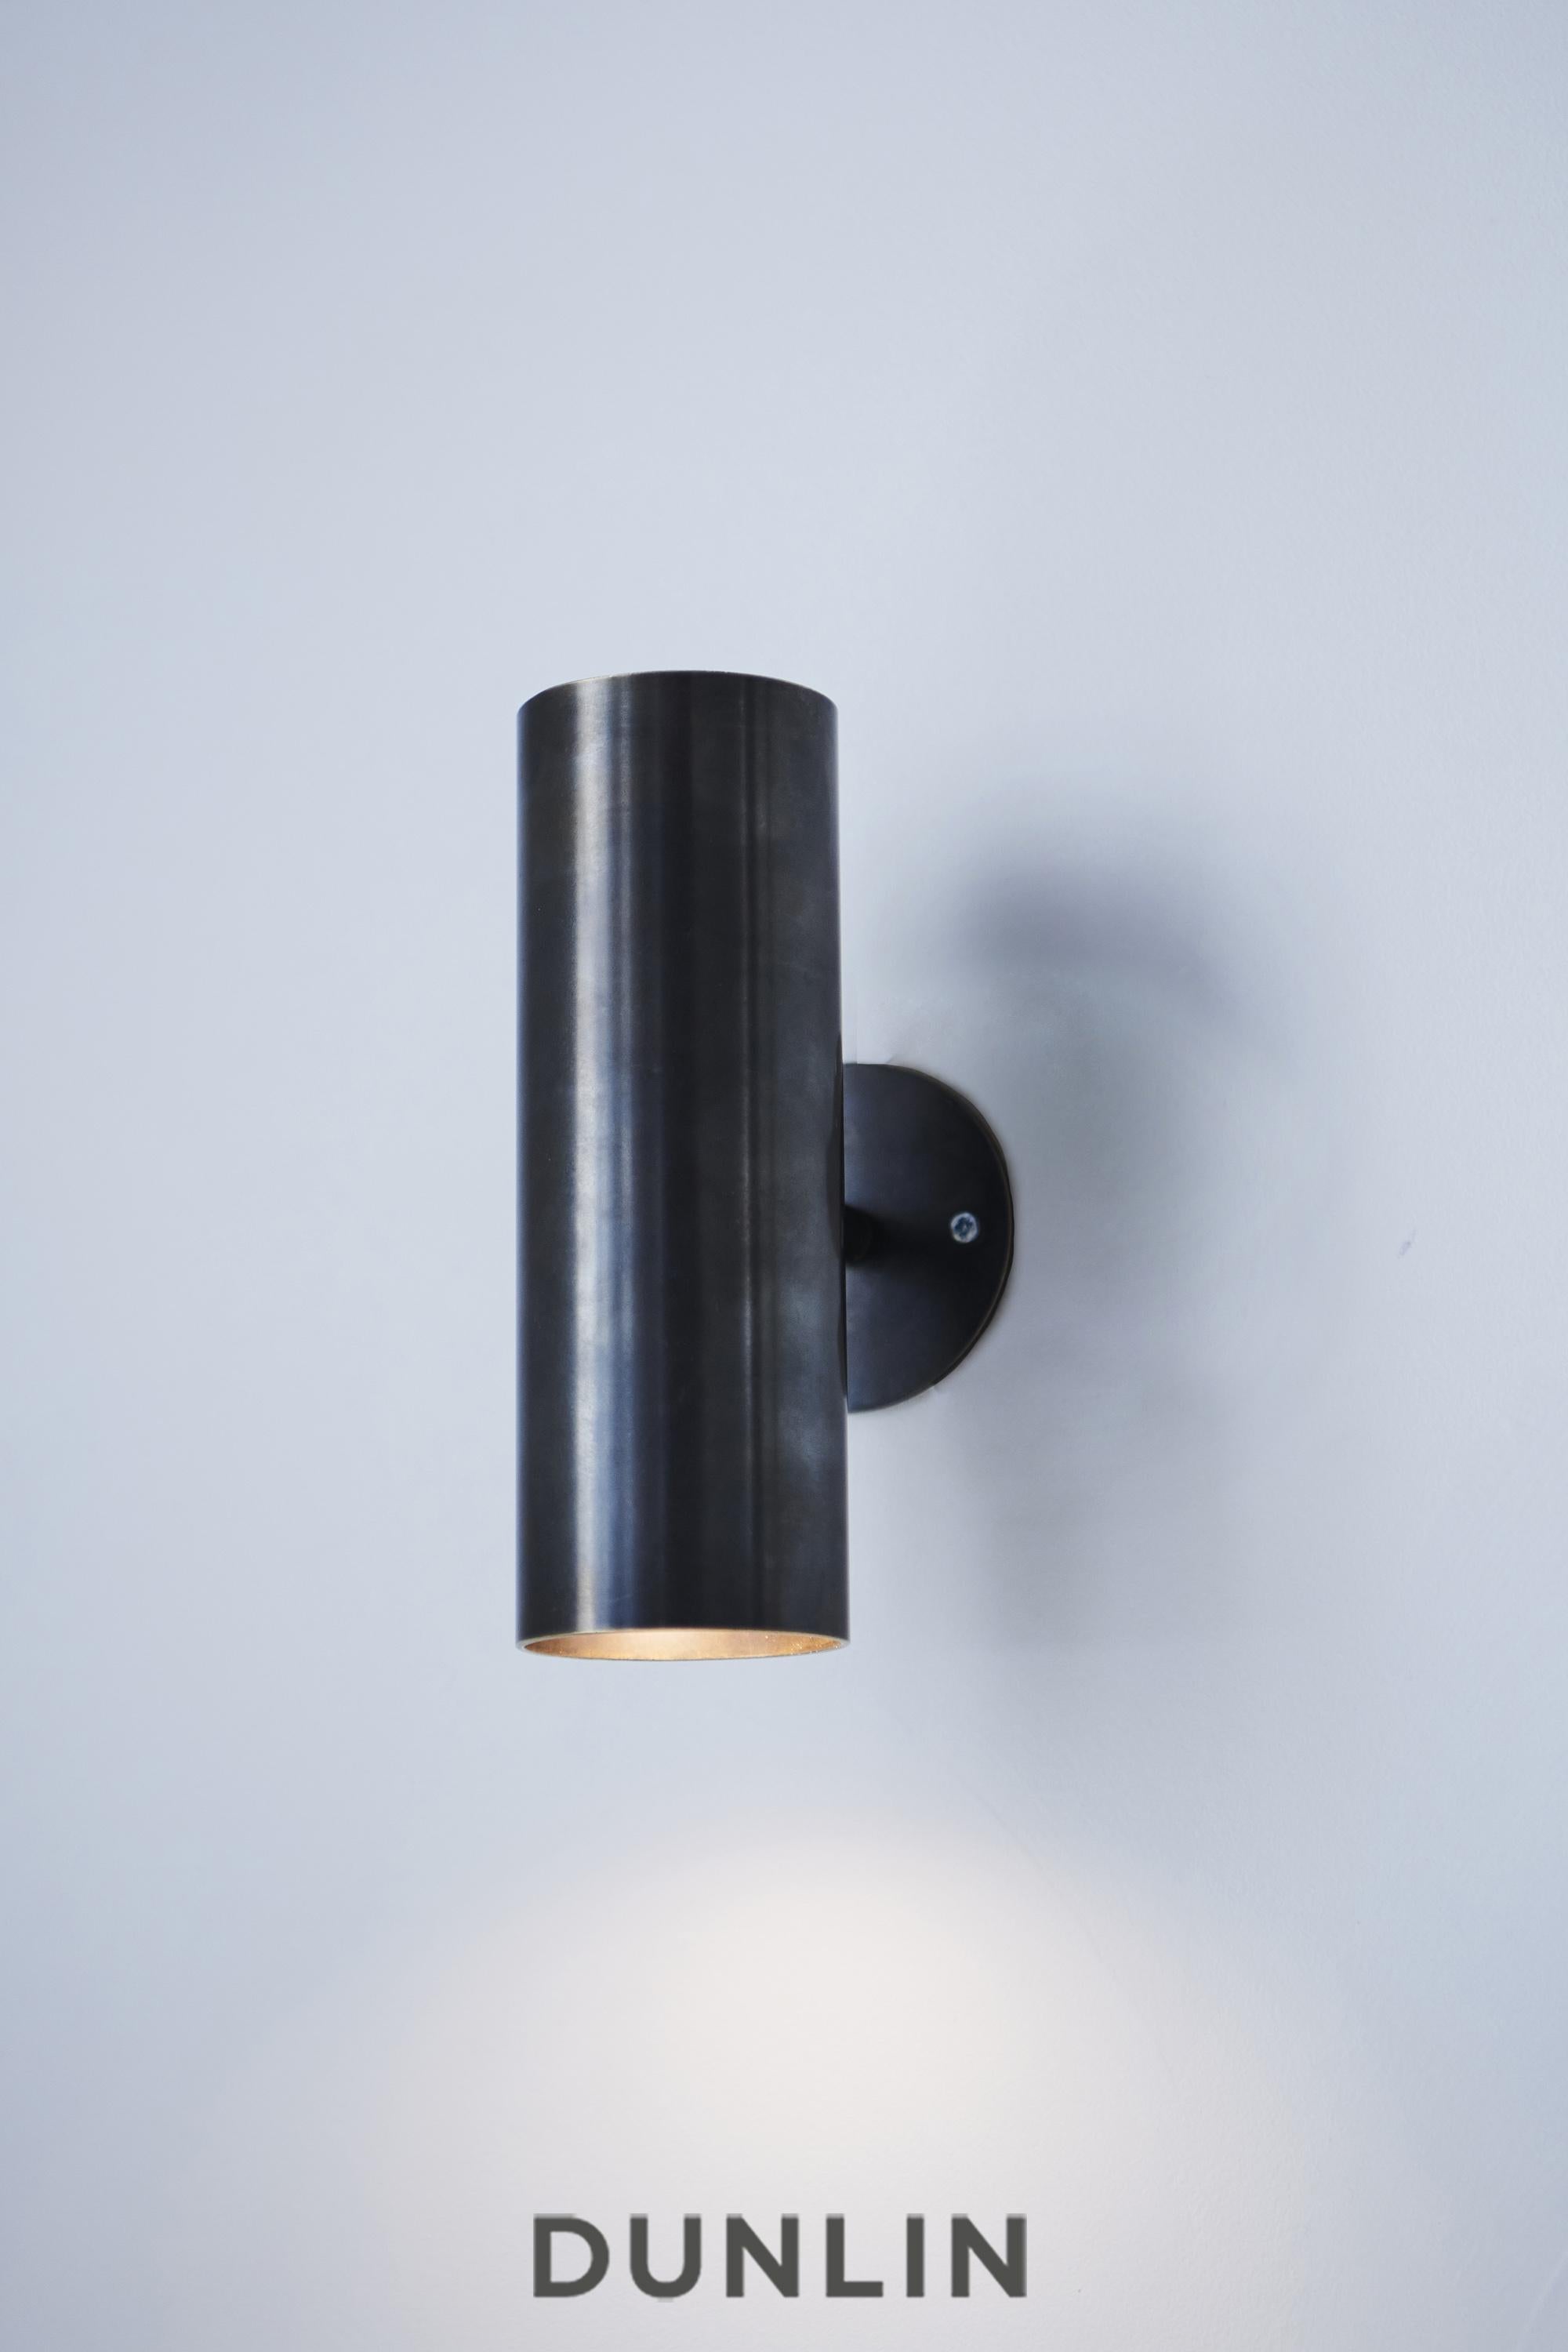 Handmade in solid brass in Australia by Dunlin. 

A playful up-down light in solid brass.
6.3 cm Diameter x 22 cm Long
Finish: Noir
Two lamp holders direct light vertically up and down, or sideways if installed horizontally. ( Globes not